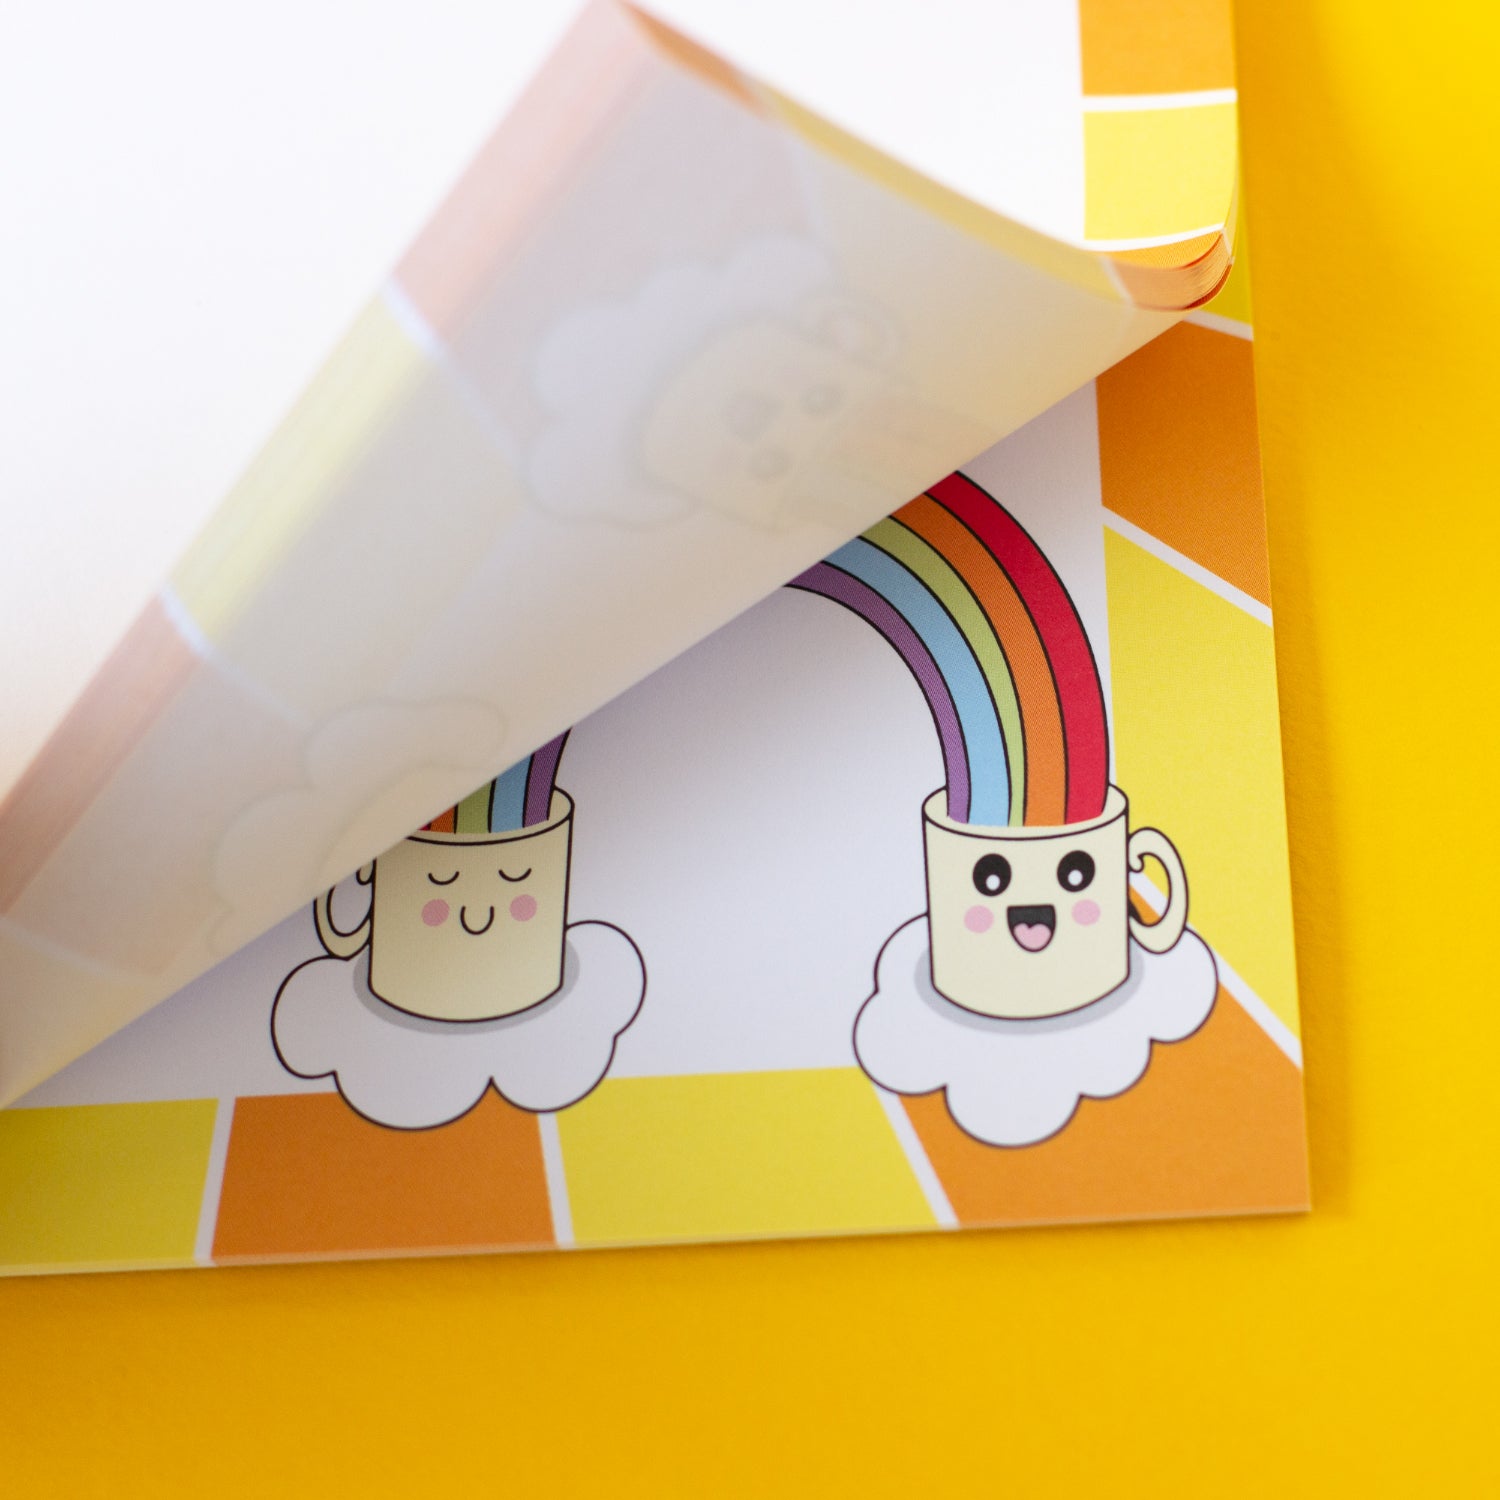 Cheerful stationery. Bright colours. Sunshine and rainbows. Cute, illustrations of mugs